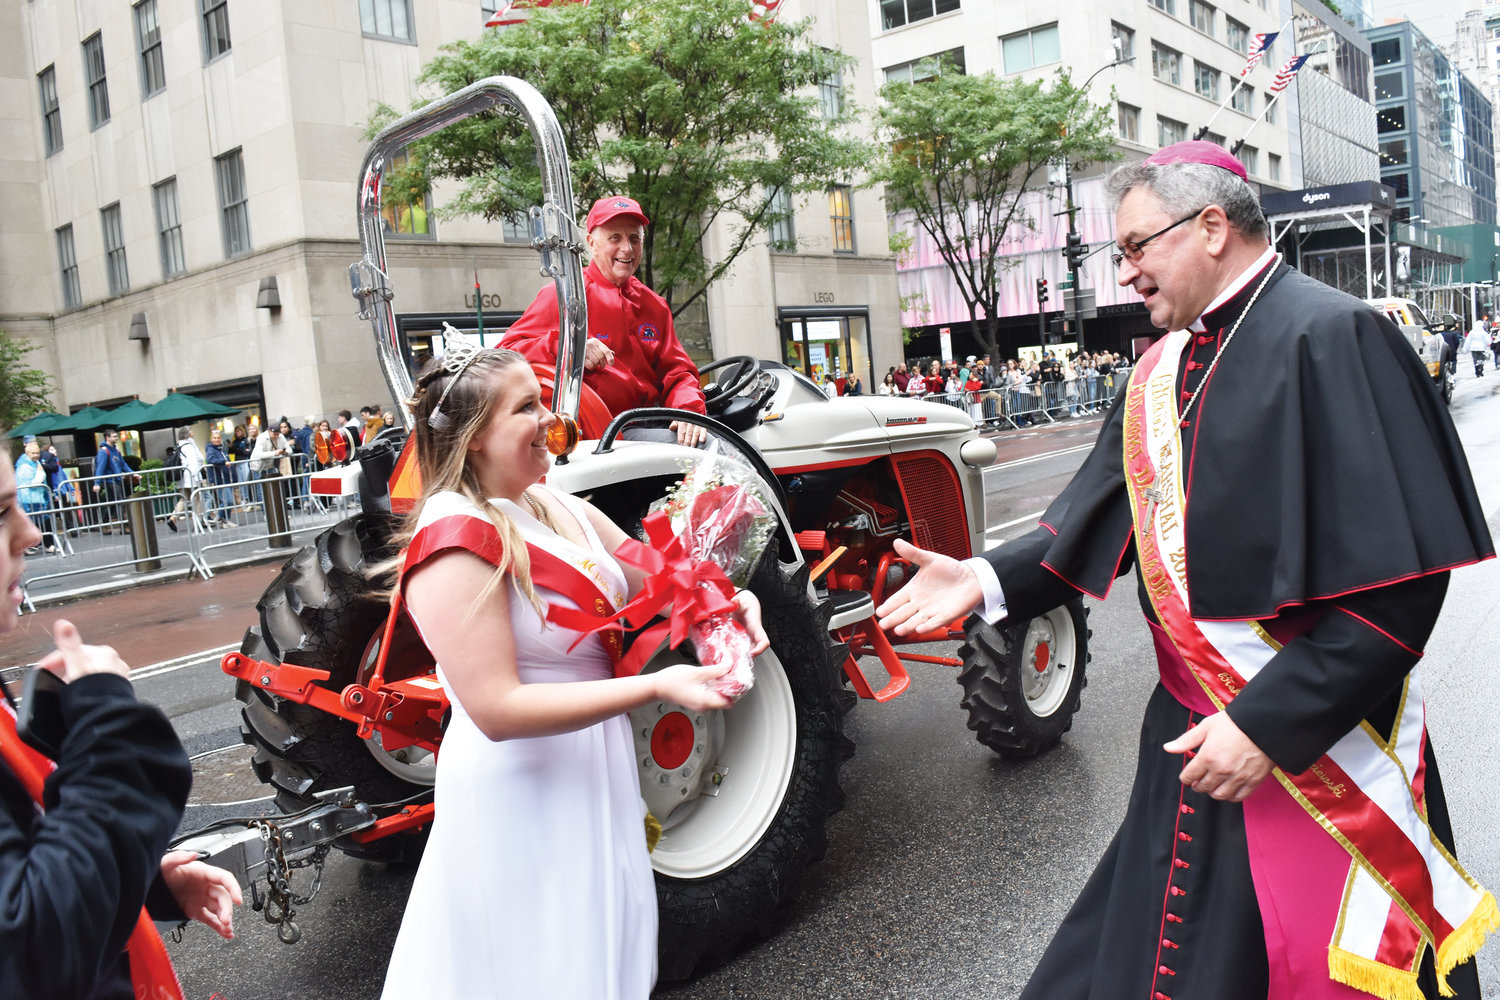 Auxiliary Bishop Witold Mroziewski of the Diocese of Brooklyn, who served as celebrant of the Pulaski Day Parade Mass at St. Patrick’s Cathedral, receives flowers.